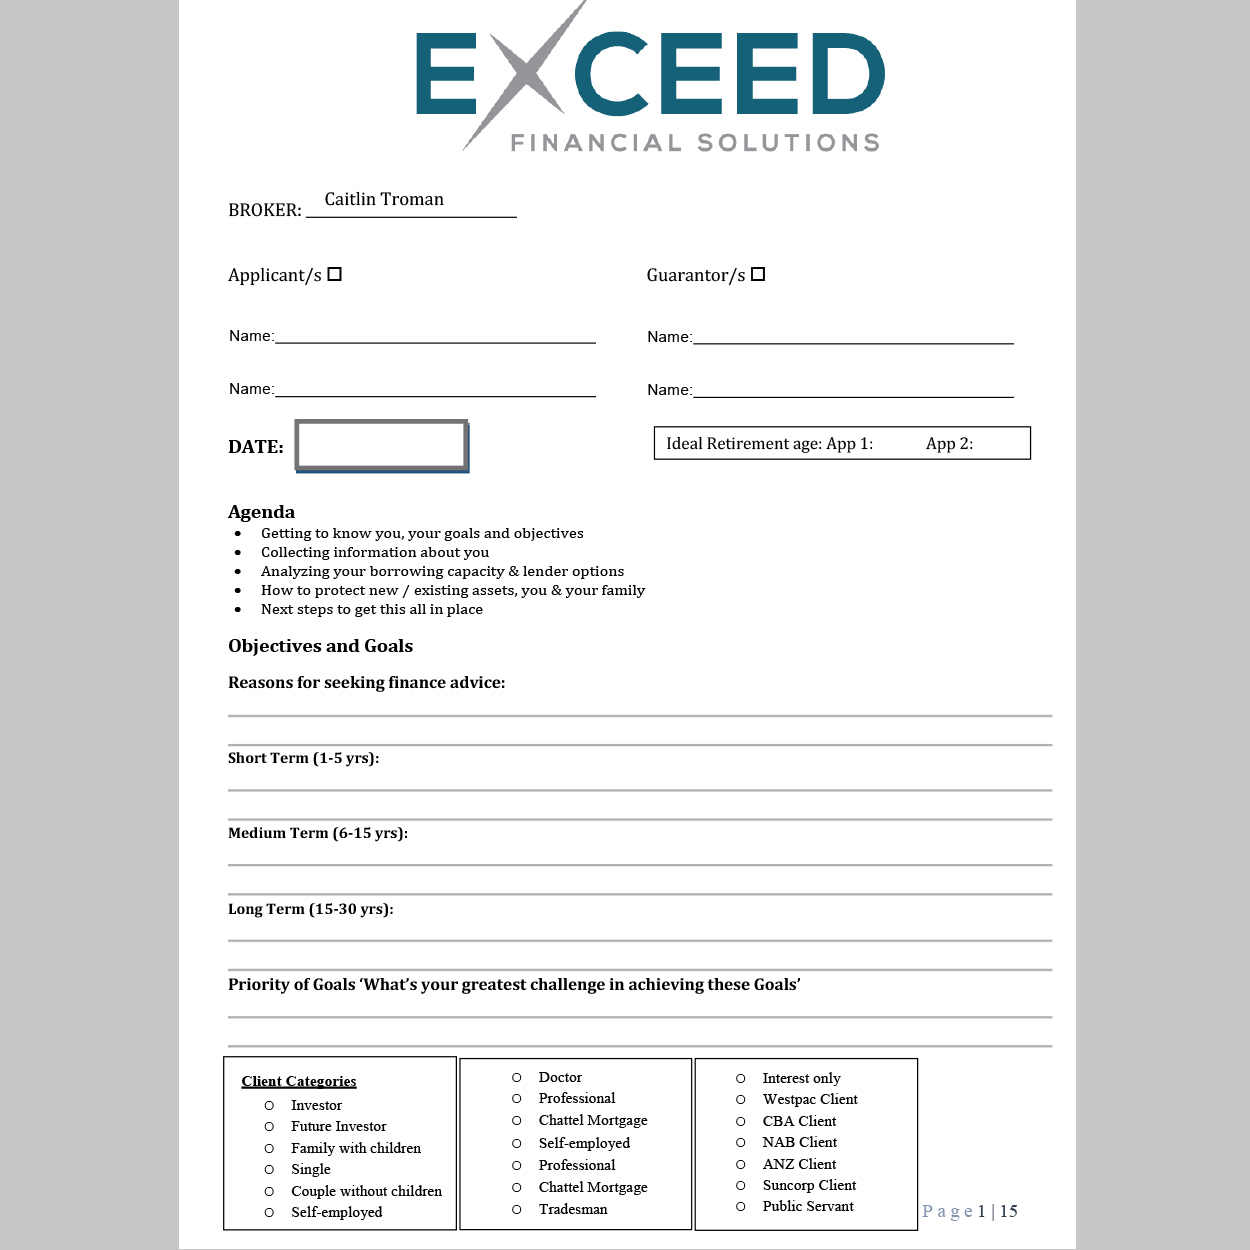 Exceed-Financial-Solution